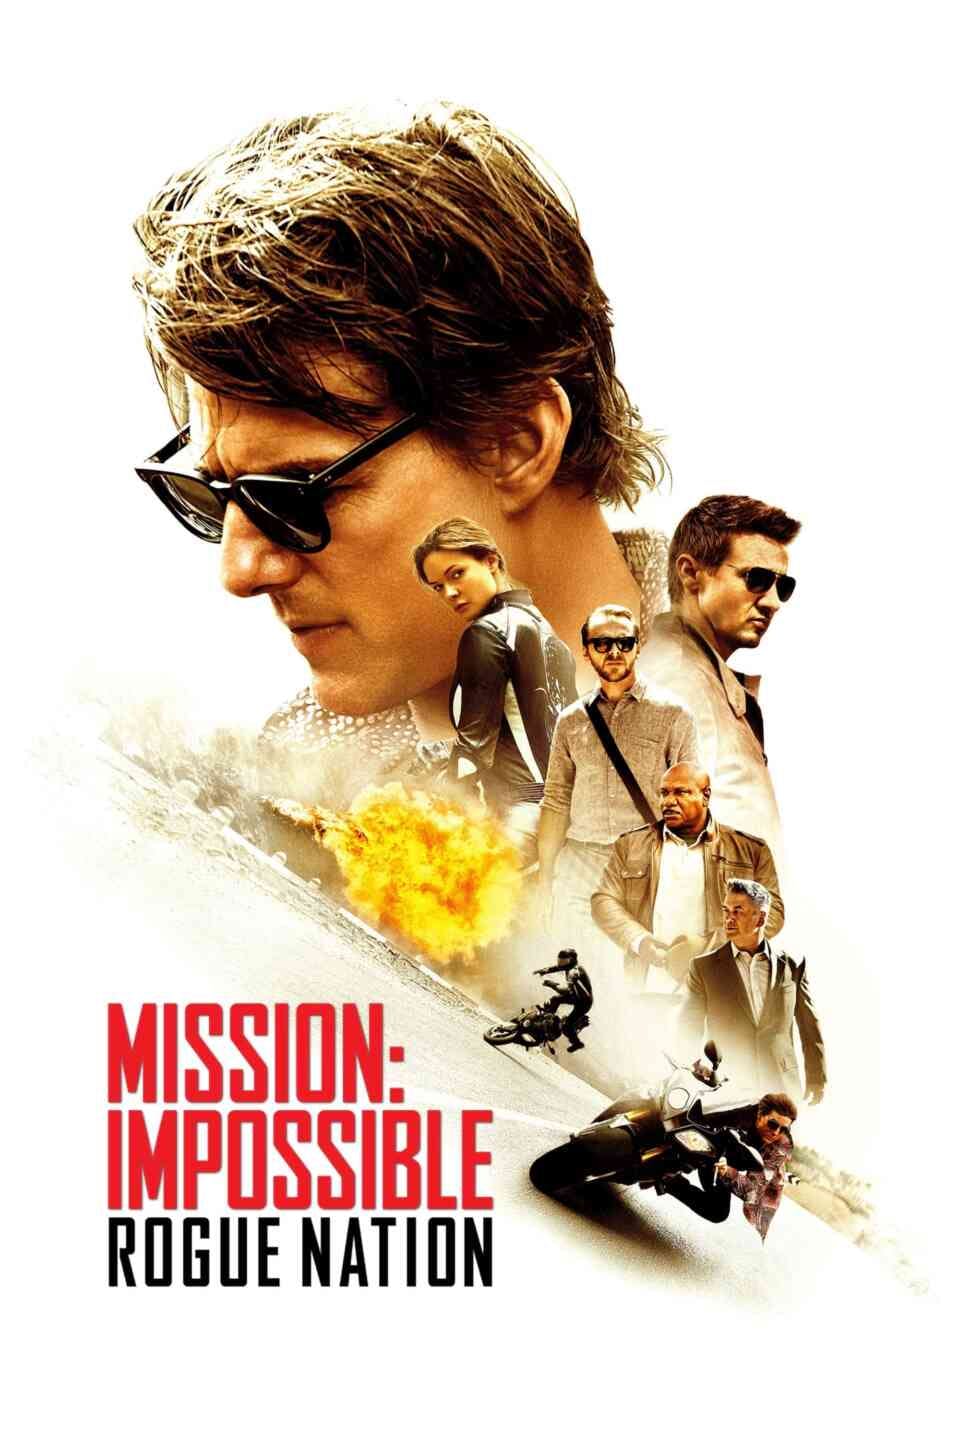 Read Impossible - Rogue Nation screenplay (poster)